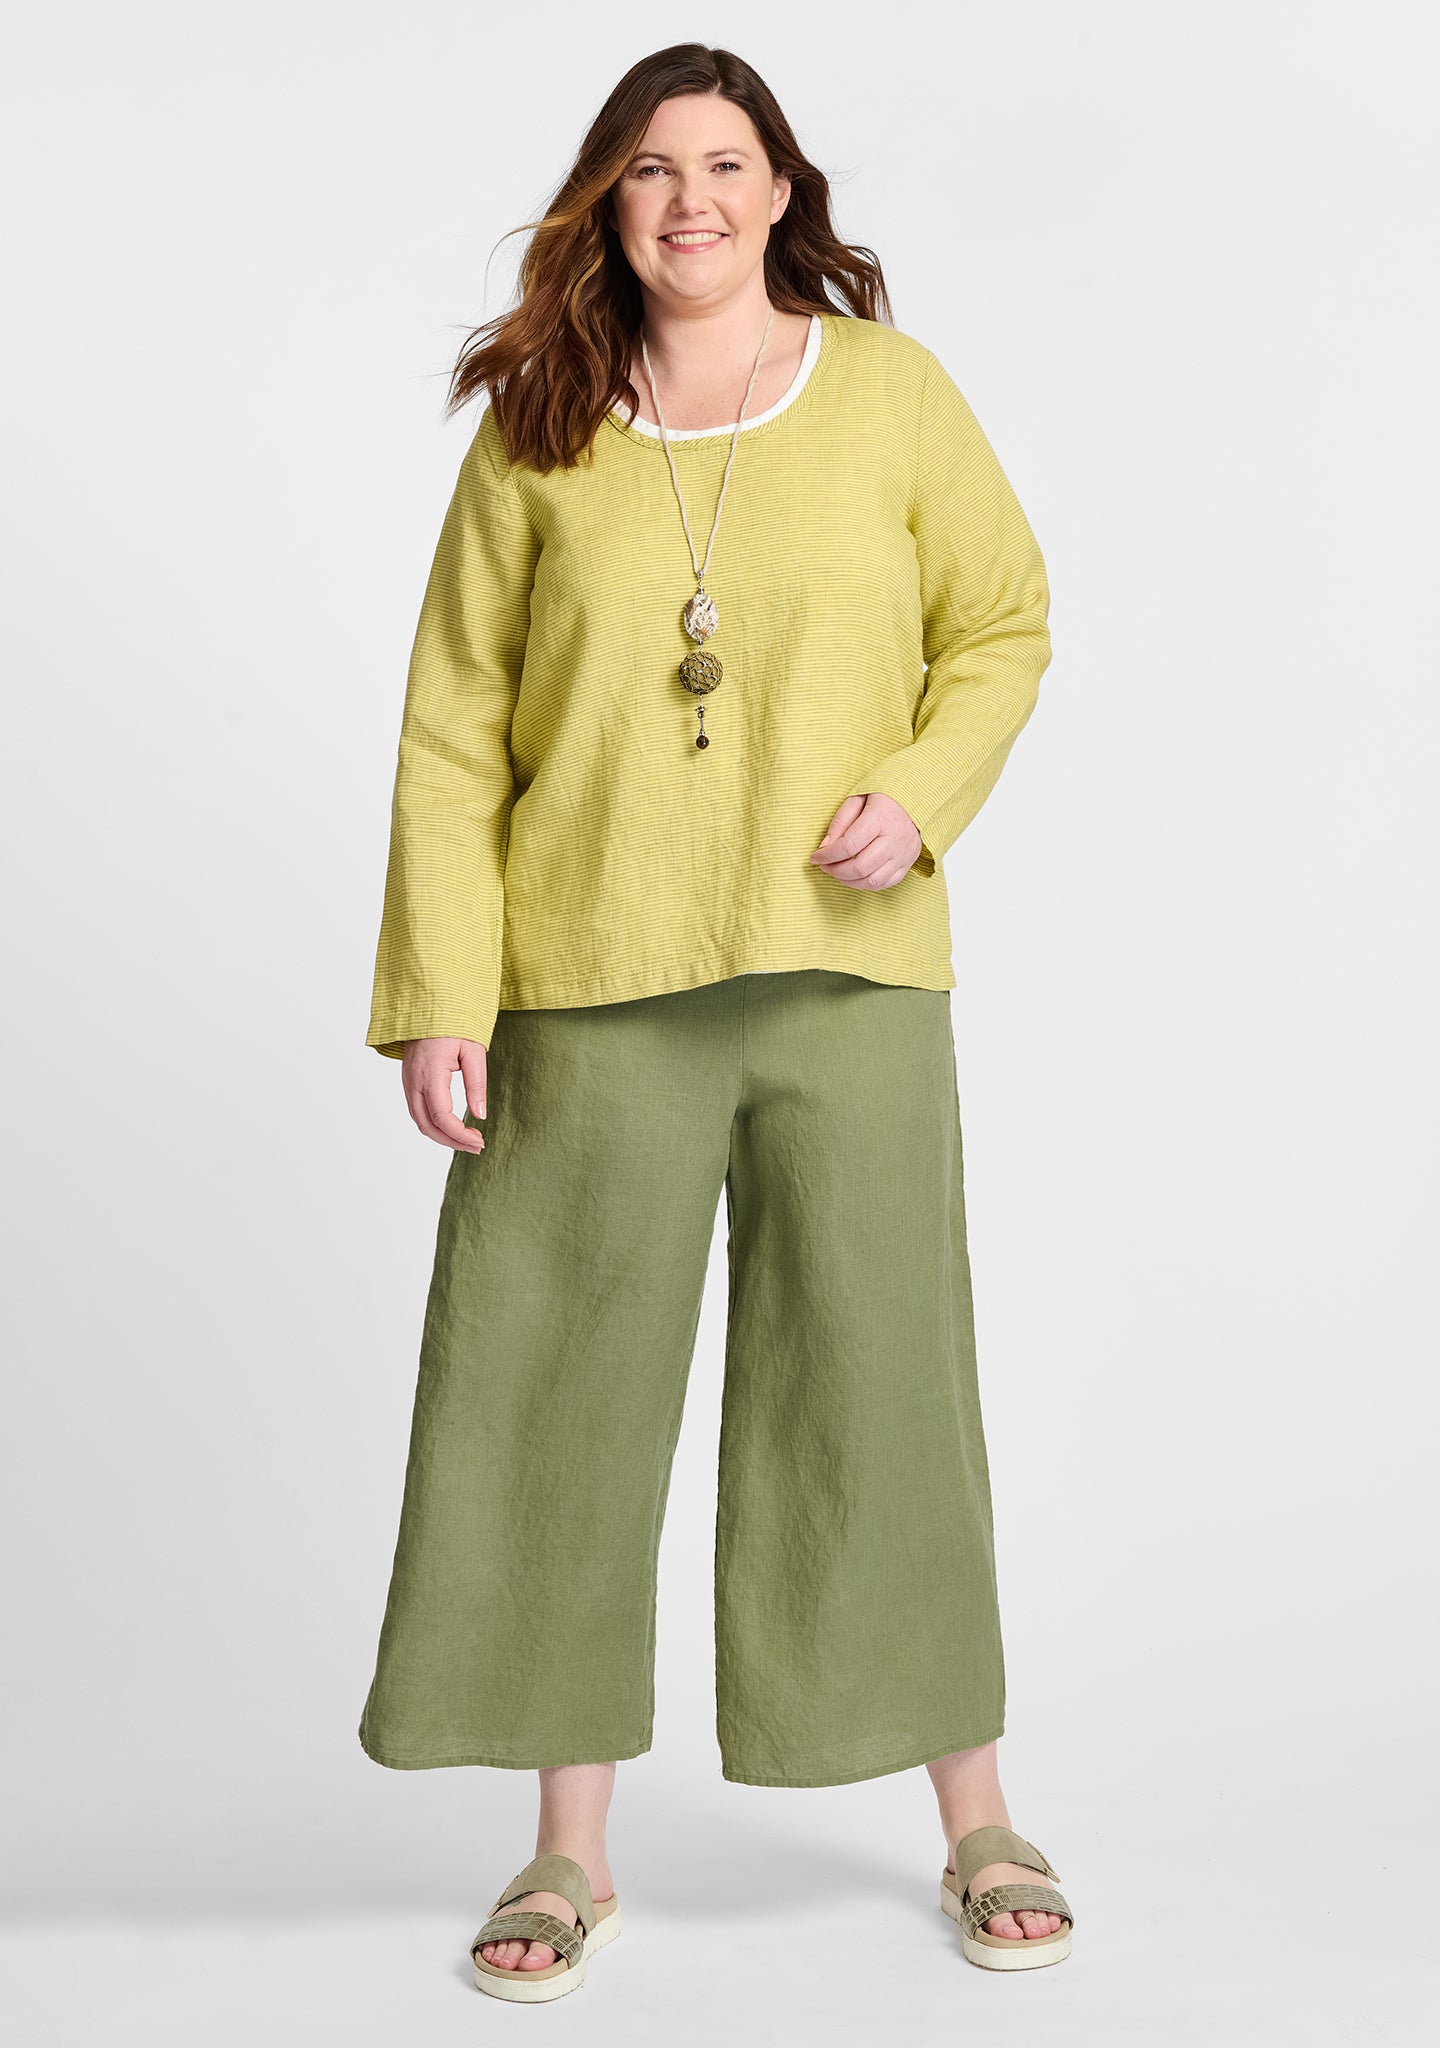 FLAX linen outfit with linen pullover in yellow and linen pants in green